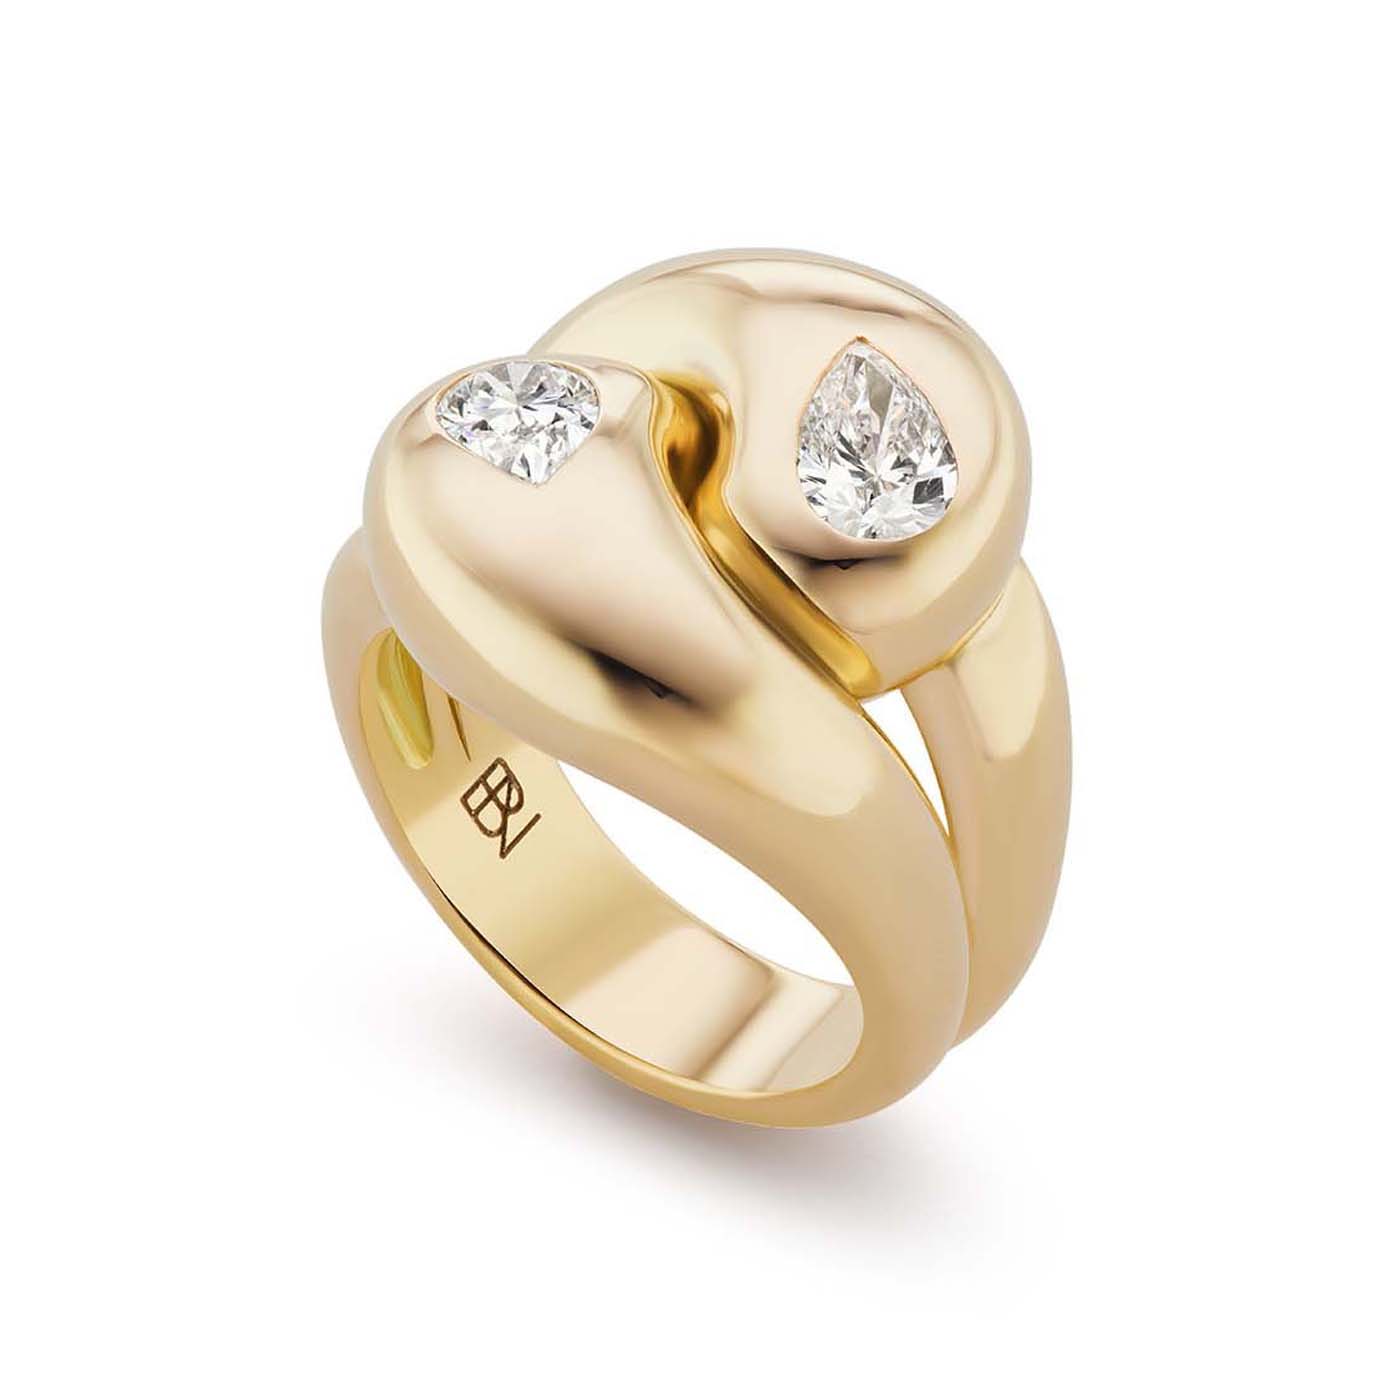 Brent Neale Knot Ring